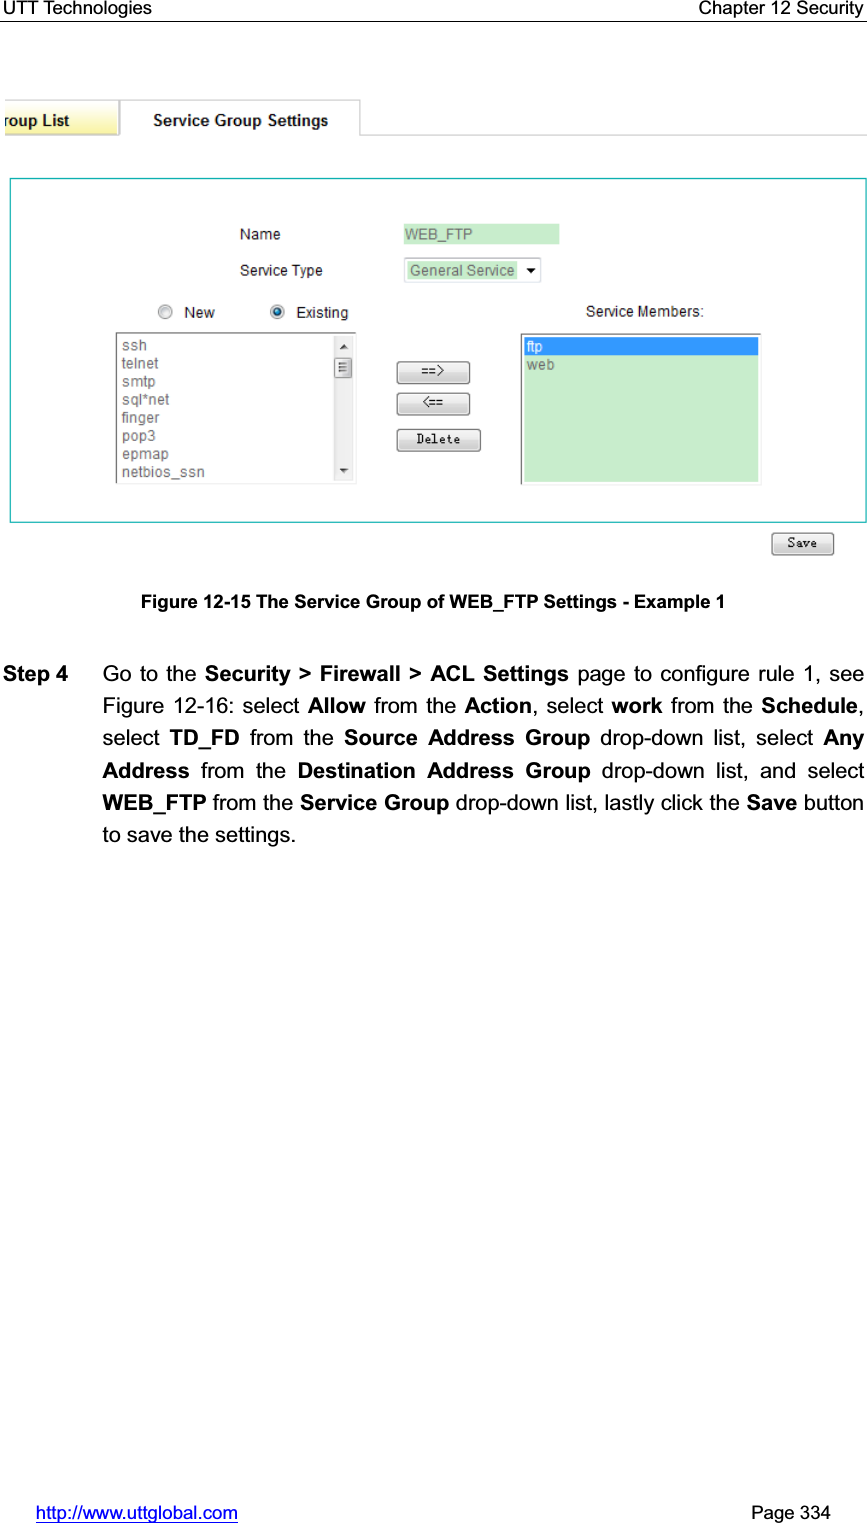 UTT Technologies    Chapter 12 Security   http://www.uttglobal.com                                                       Page 334 Figure 12-15 The Service Group of WEB_FTP Settings - Example 1Step 4  Go to the Security &gt; Firewall &gt; ACL Settings page to configure rule 1, see Figure 12-16: select Allow from the Action, select work from the Schedule,select  TD_FD from the Source Address Group drop-down list, select Any Address from the Destination Address Group drop-down list, and select WEB_FTP from the Service Group drop-down list, lastly click the Save button to save the settings. 